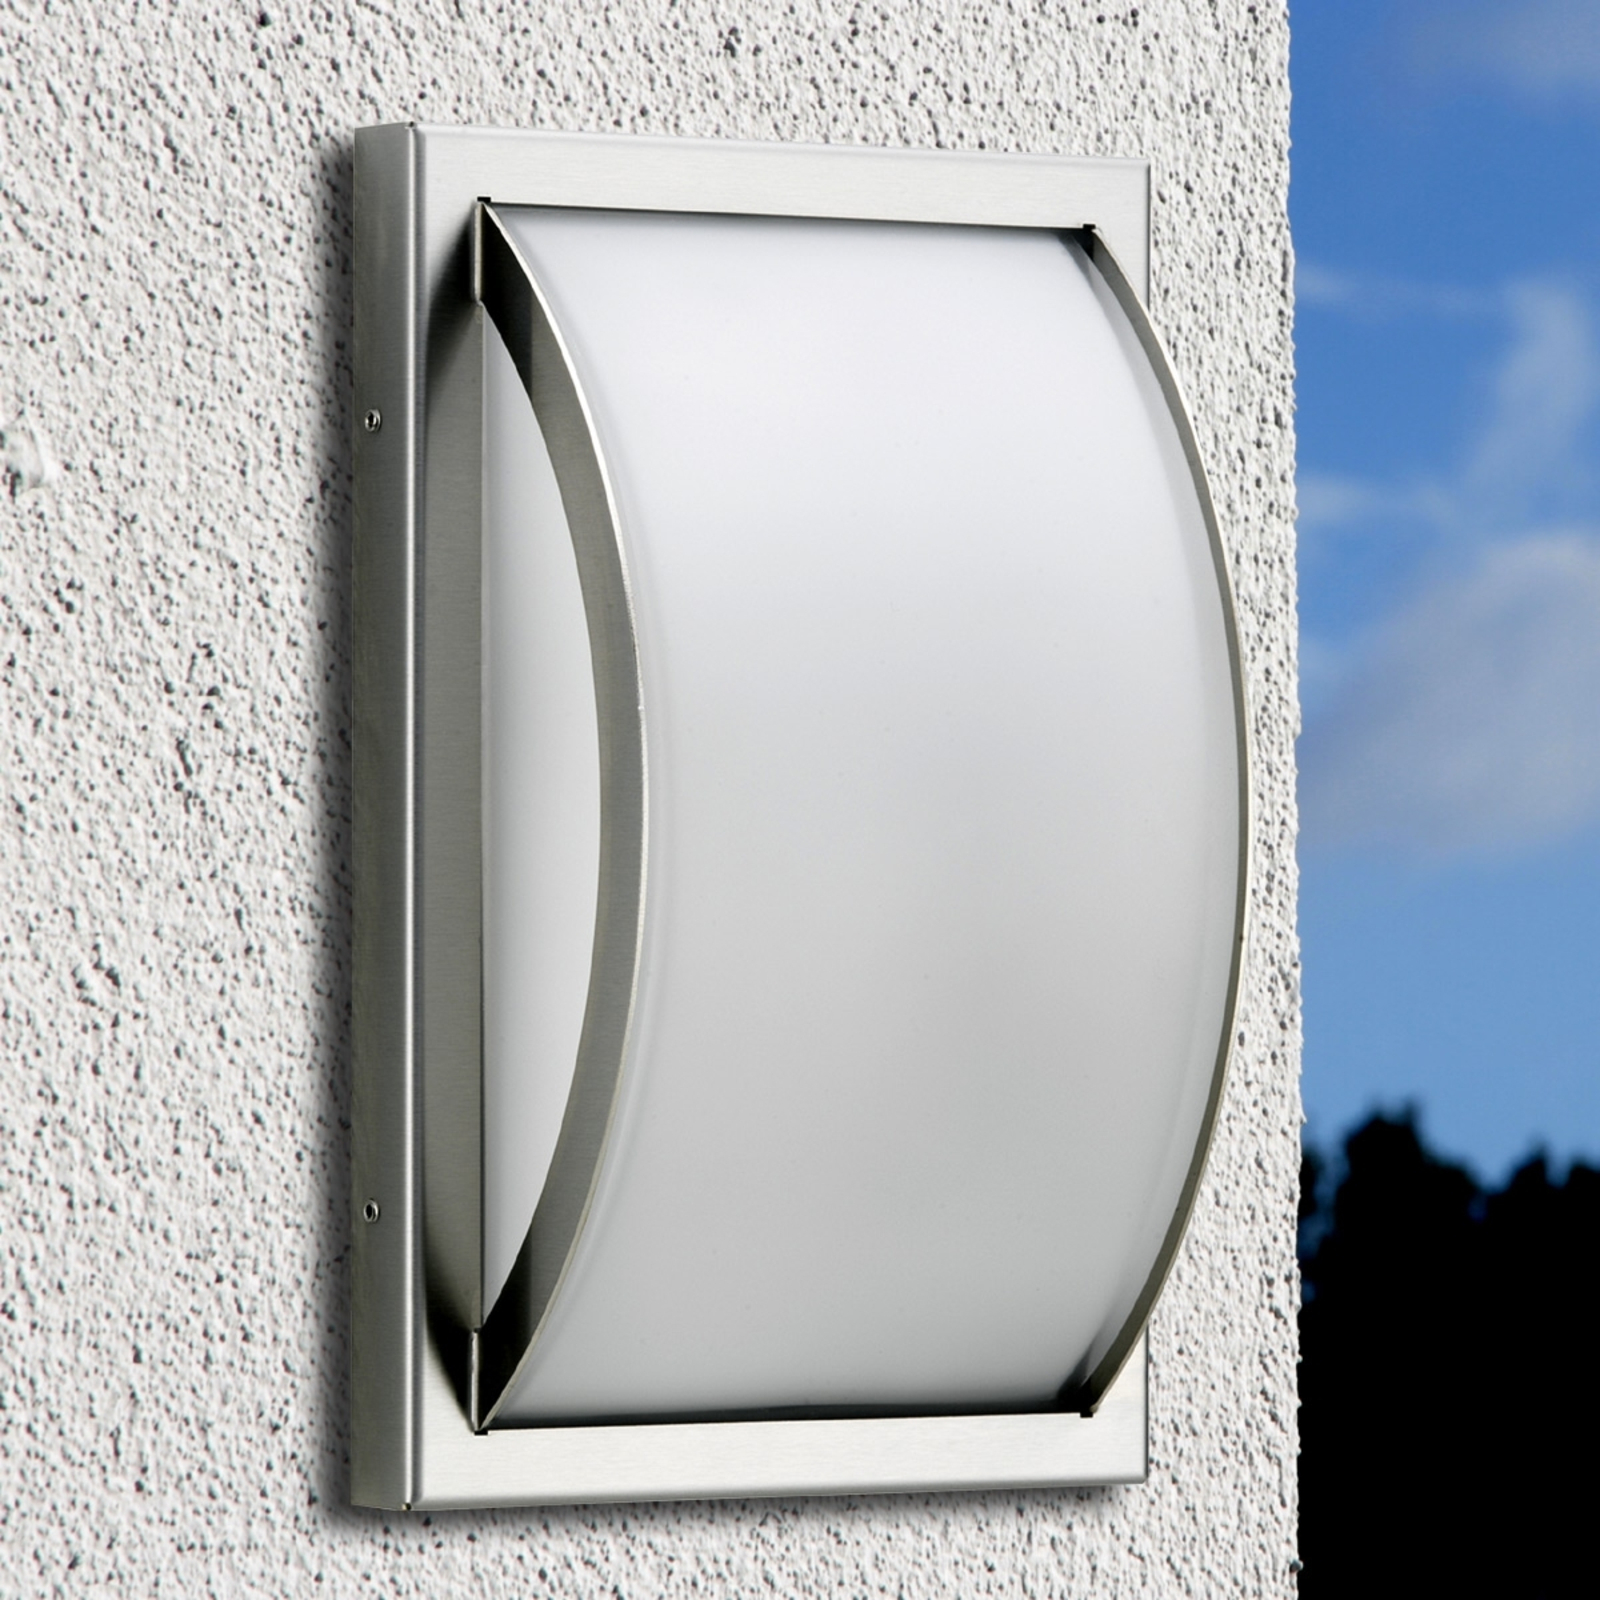 Curved outdoor wall light Piegare